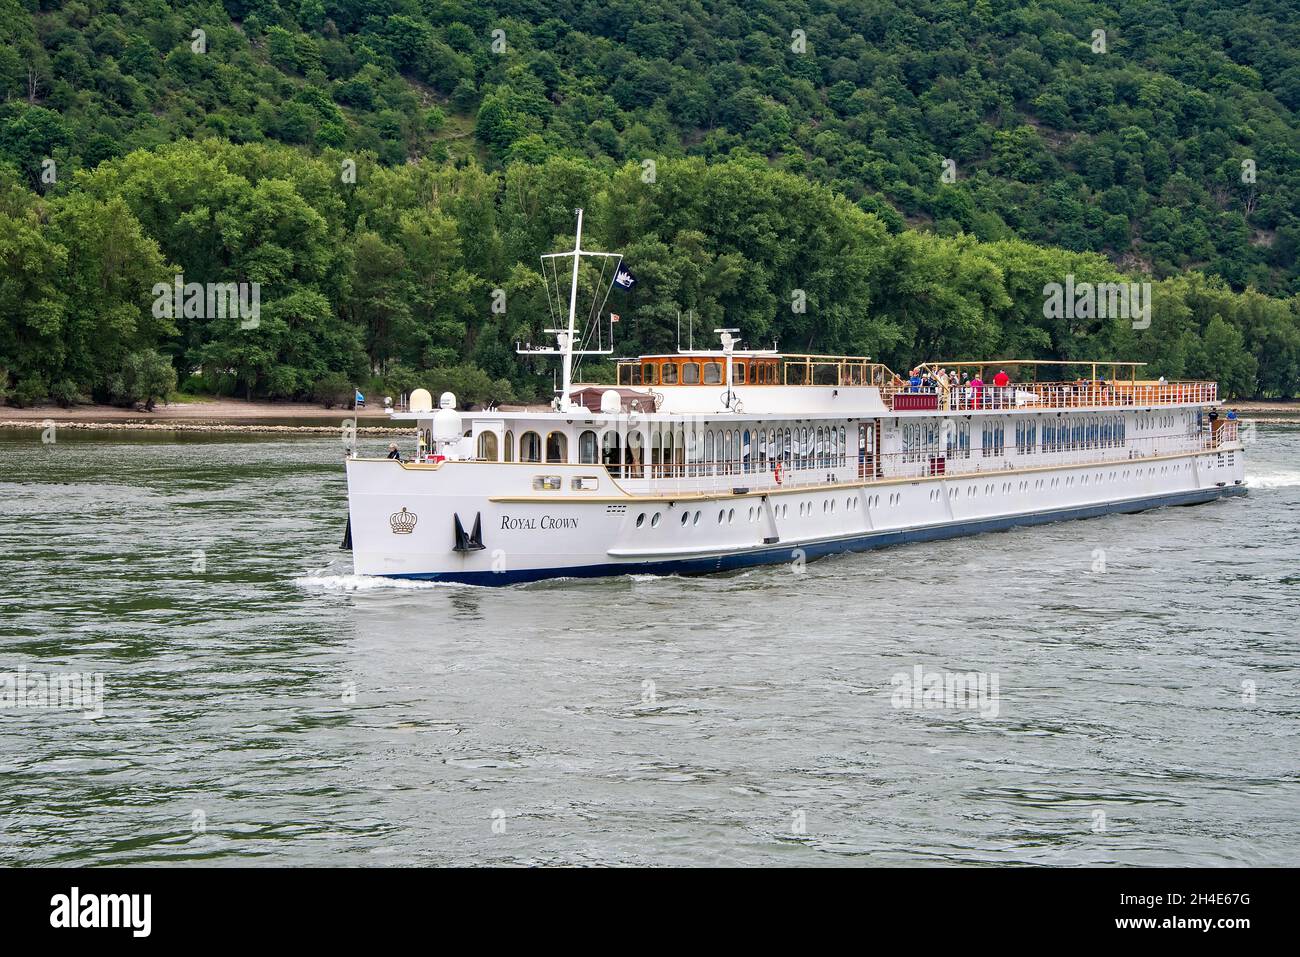 Rhine River, Germany - July 16, 2017:  The MS Royal Crown cruising down the Rhine River with passengers aboard. Stock Photo